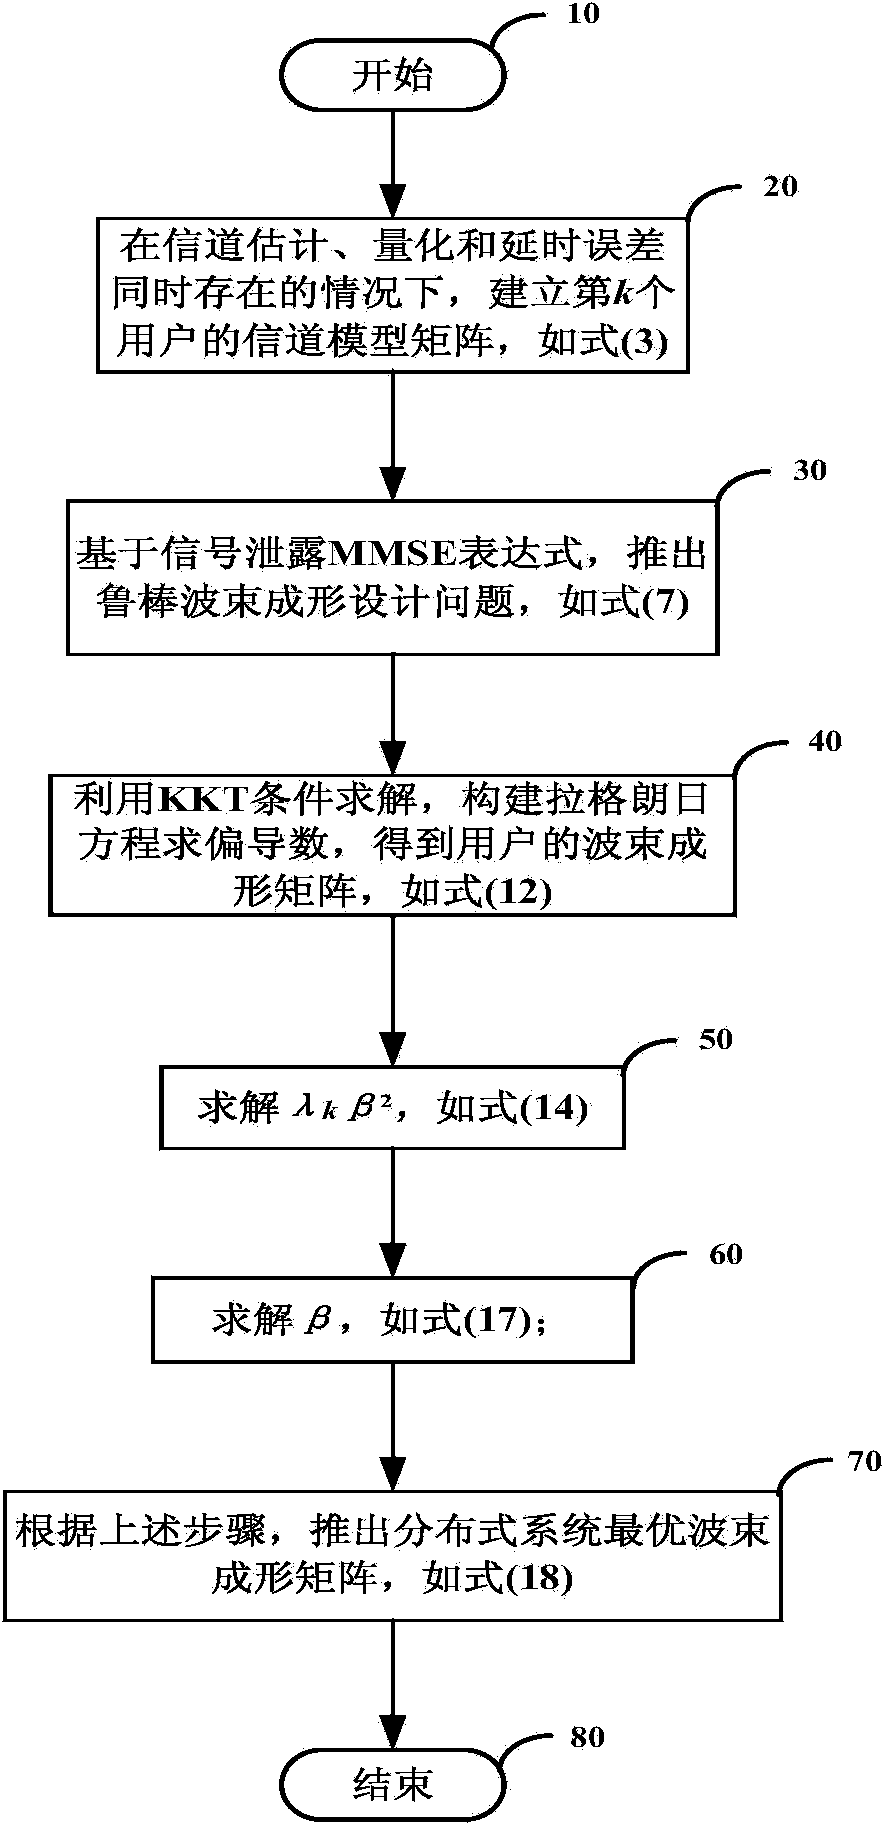 Distributed multi-user downstream MIMO robust beam forming method